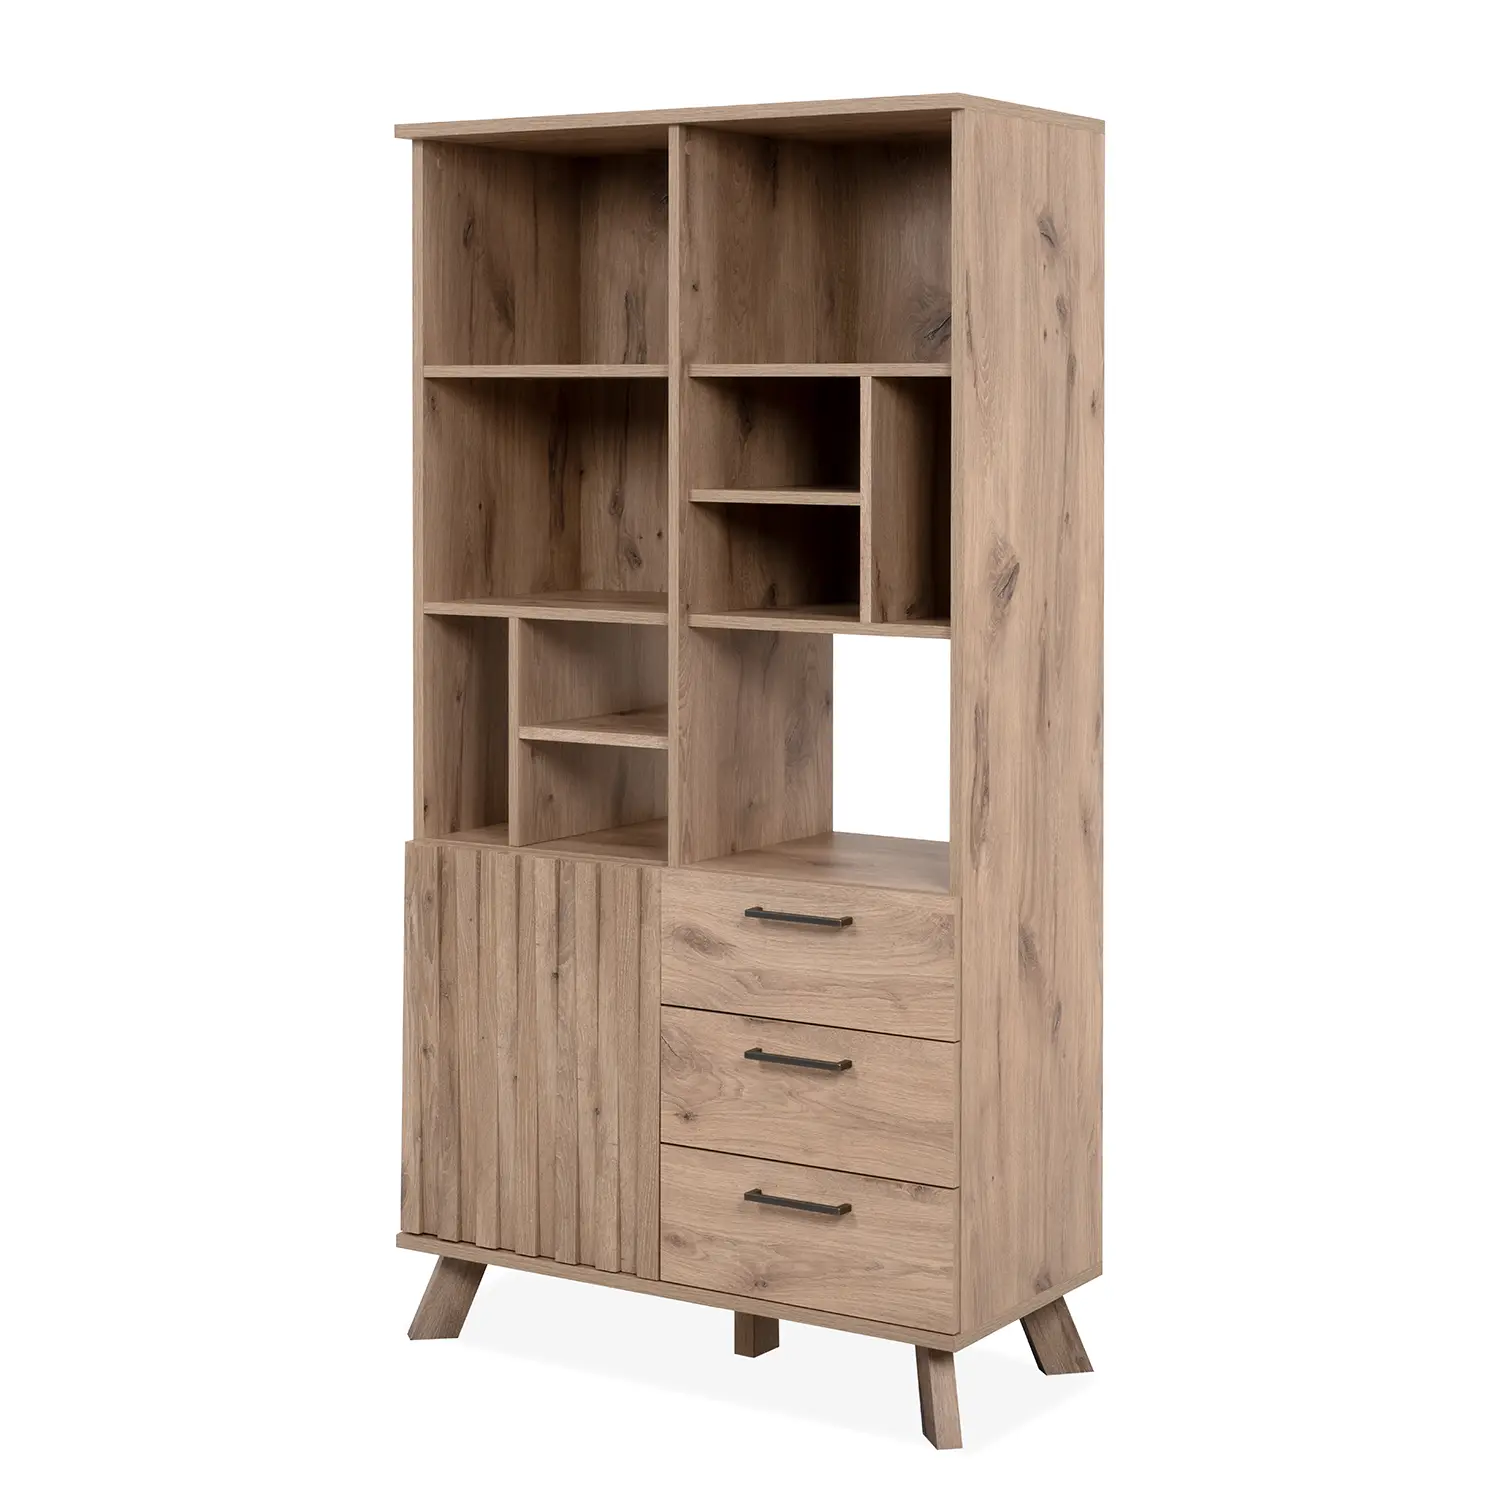 Highboard Wragby | Highboards